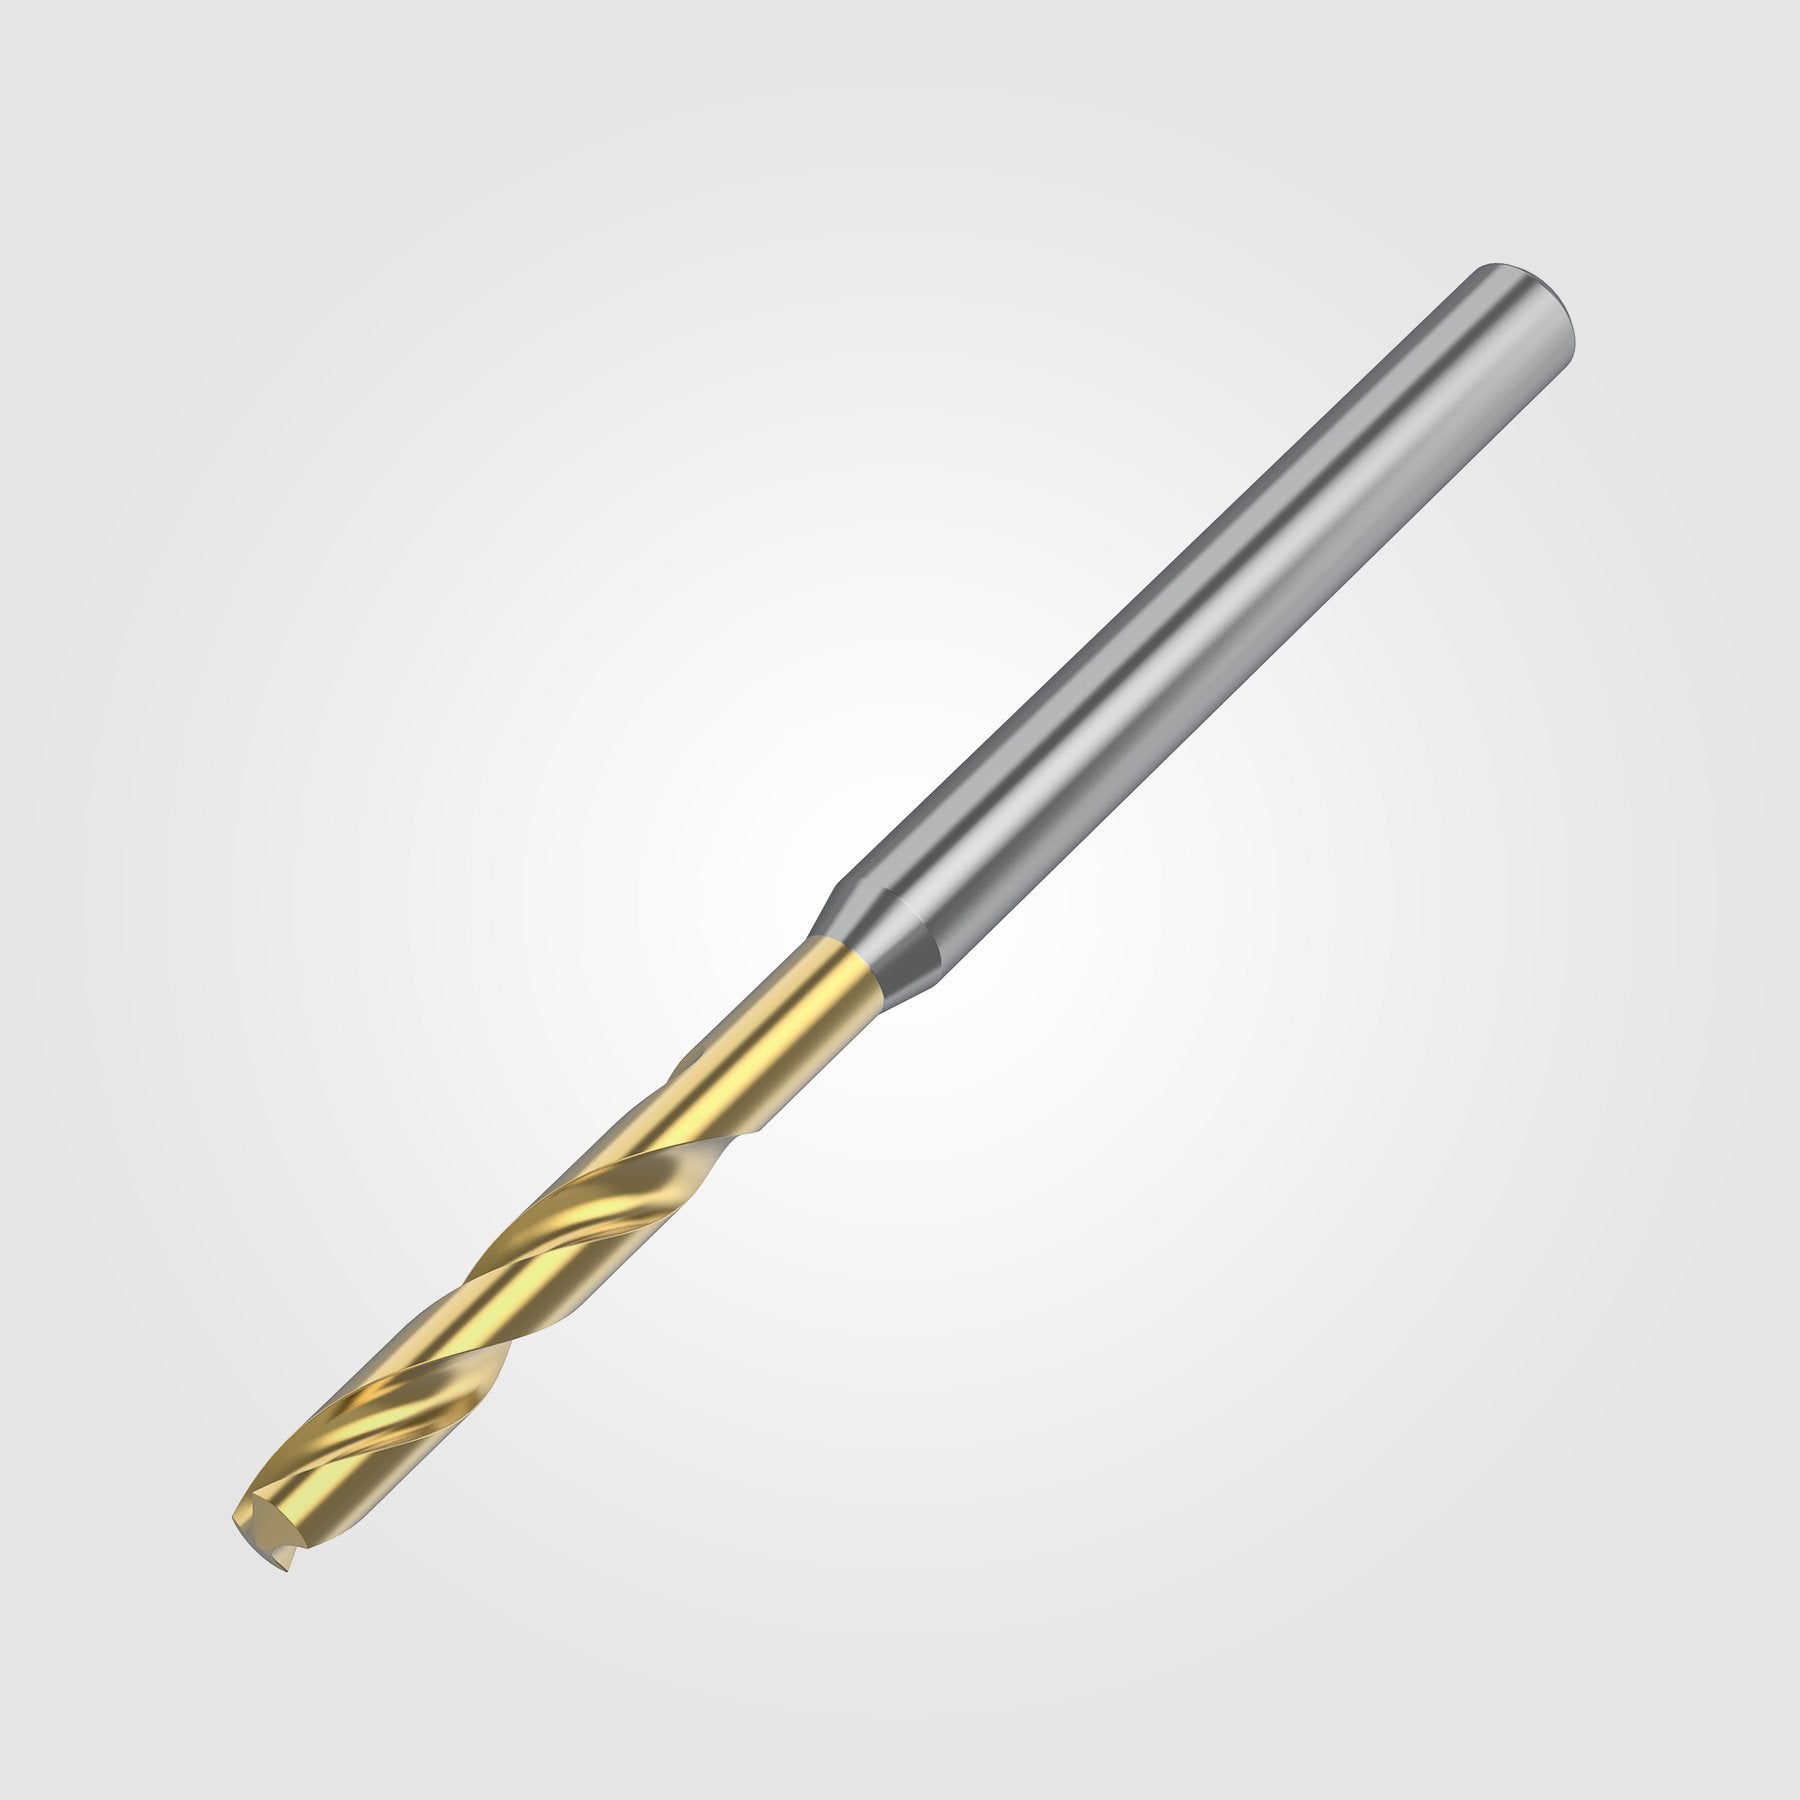 GOdrill (THROUGH COOLANT) | 16.271mm / .6406" / 5xD | SOLID CARBIDE DRILL | 4149366